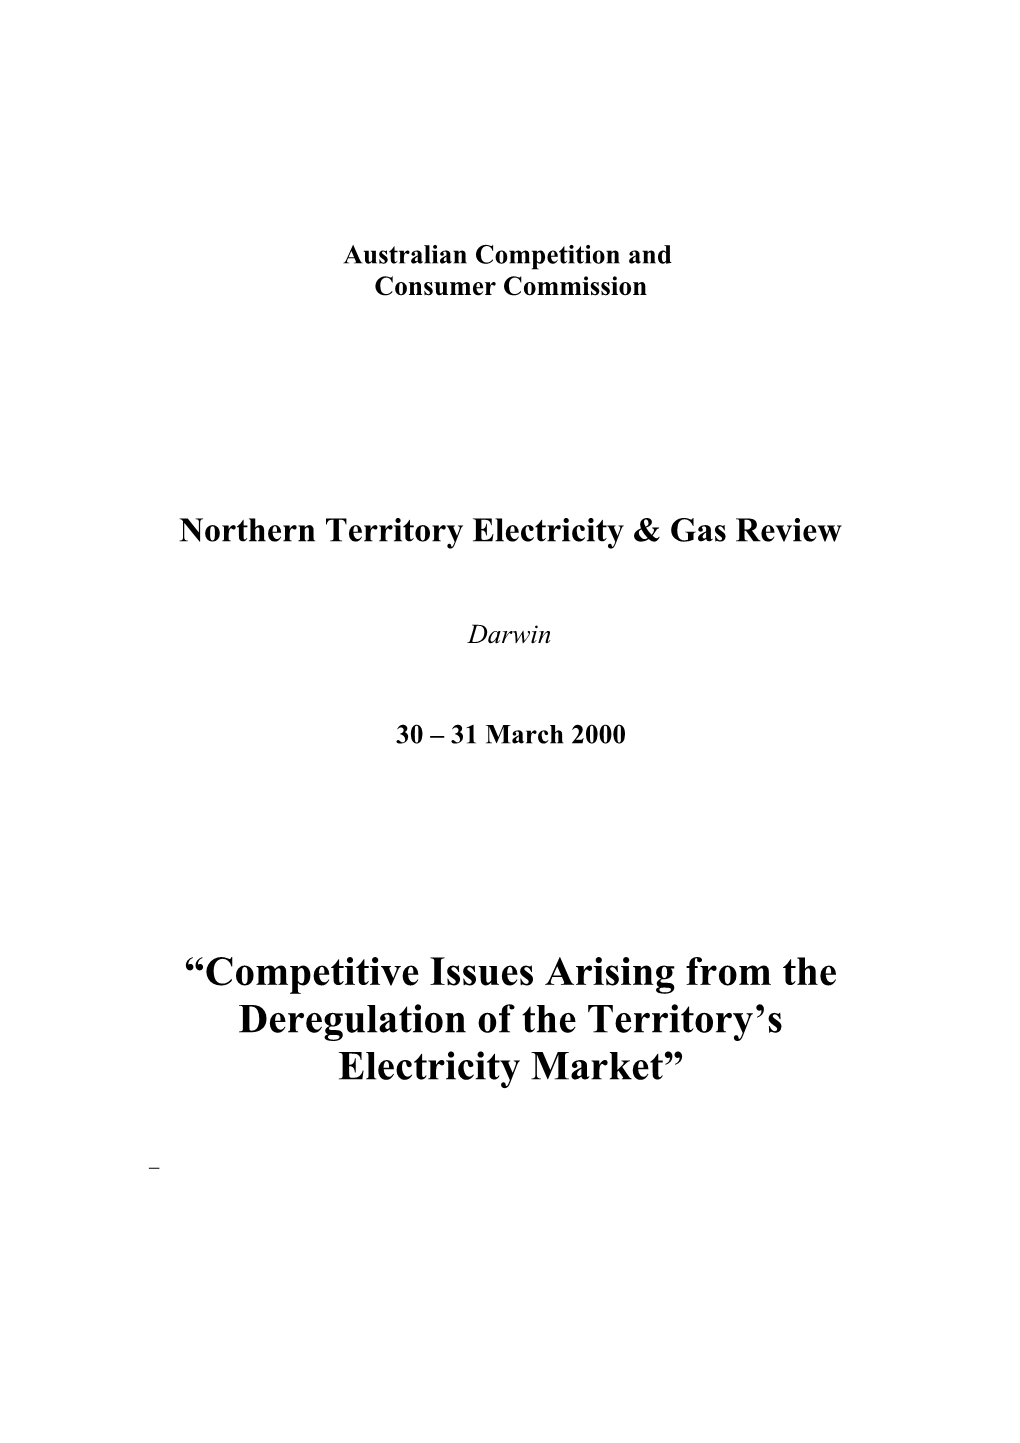 NT Electricty & Gas Review NT 30/3/00